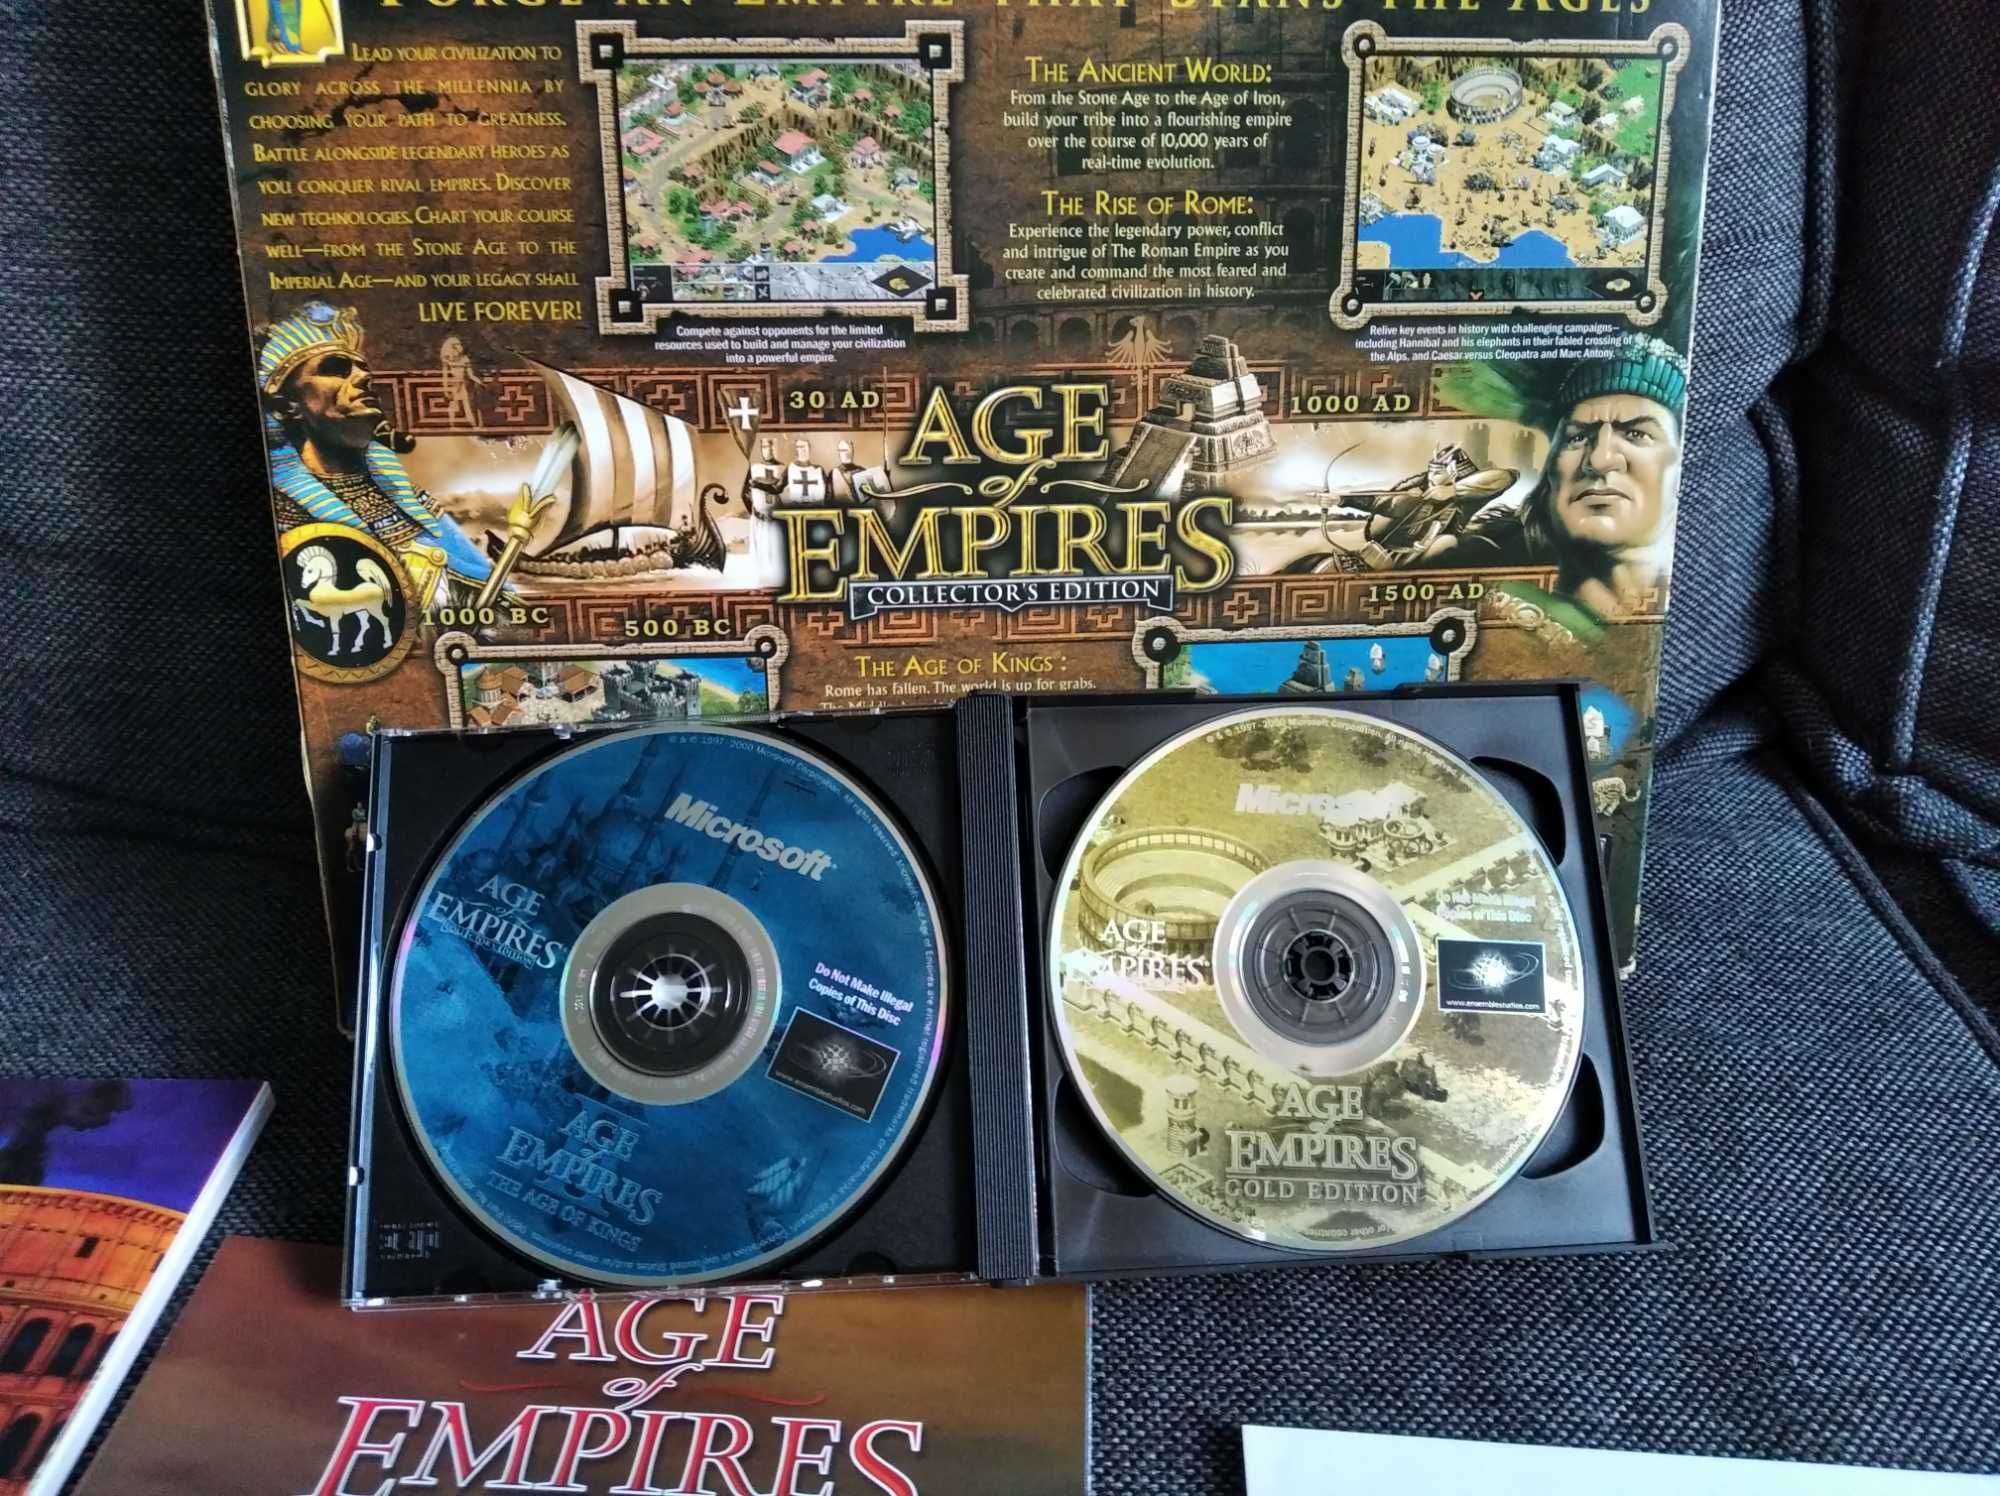 Age of Empires "Collector's Edition"